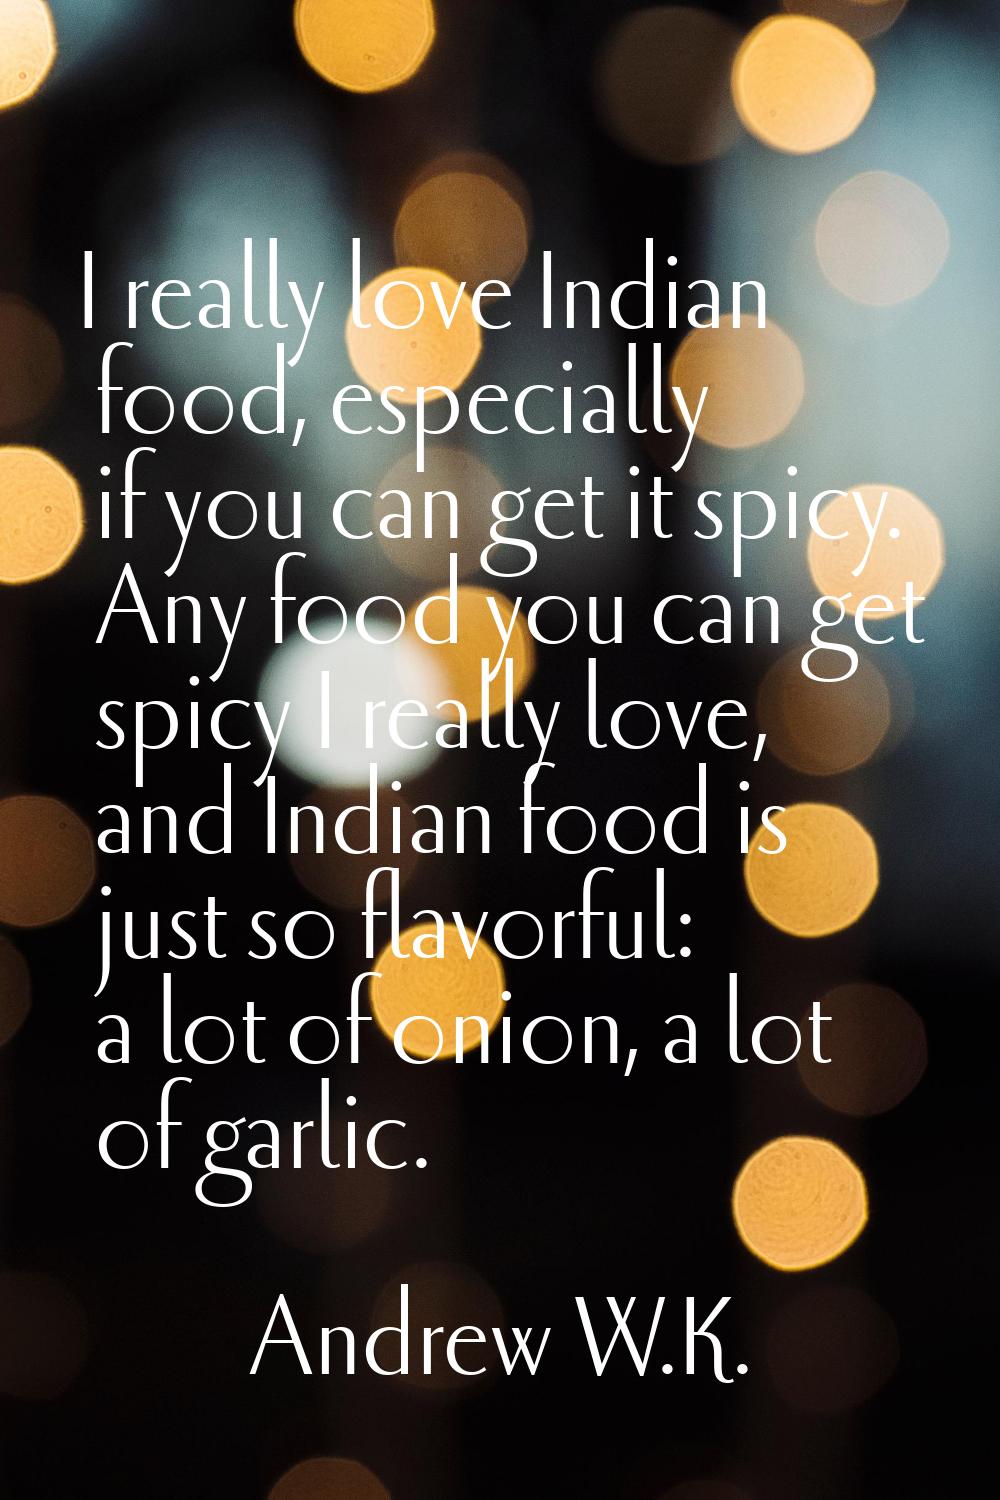 I really love Indian food, especially if you can get it spicy. Any food you can get spicy I really 